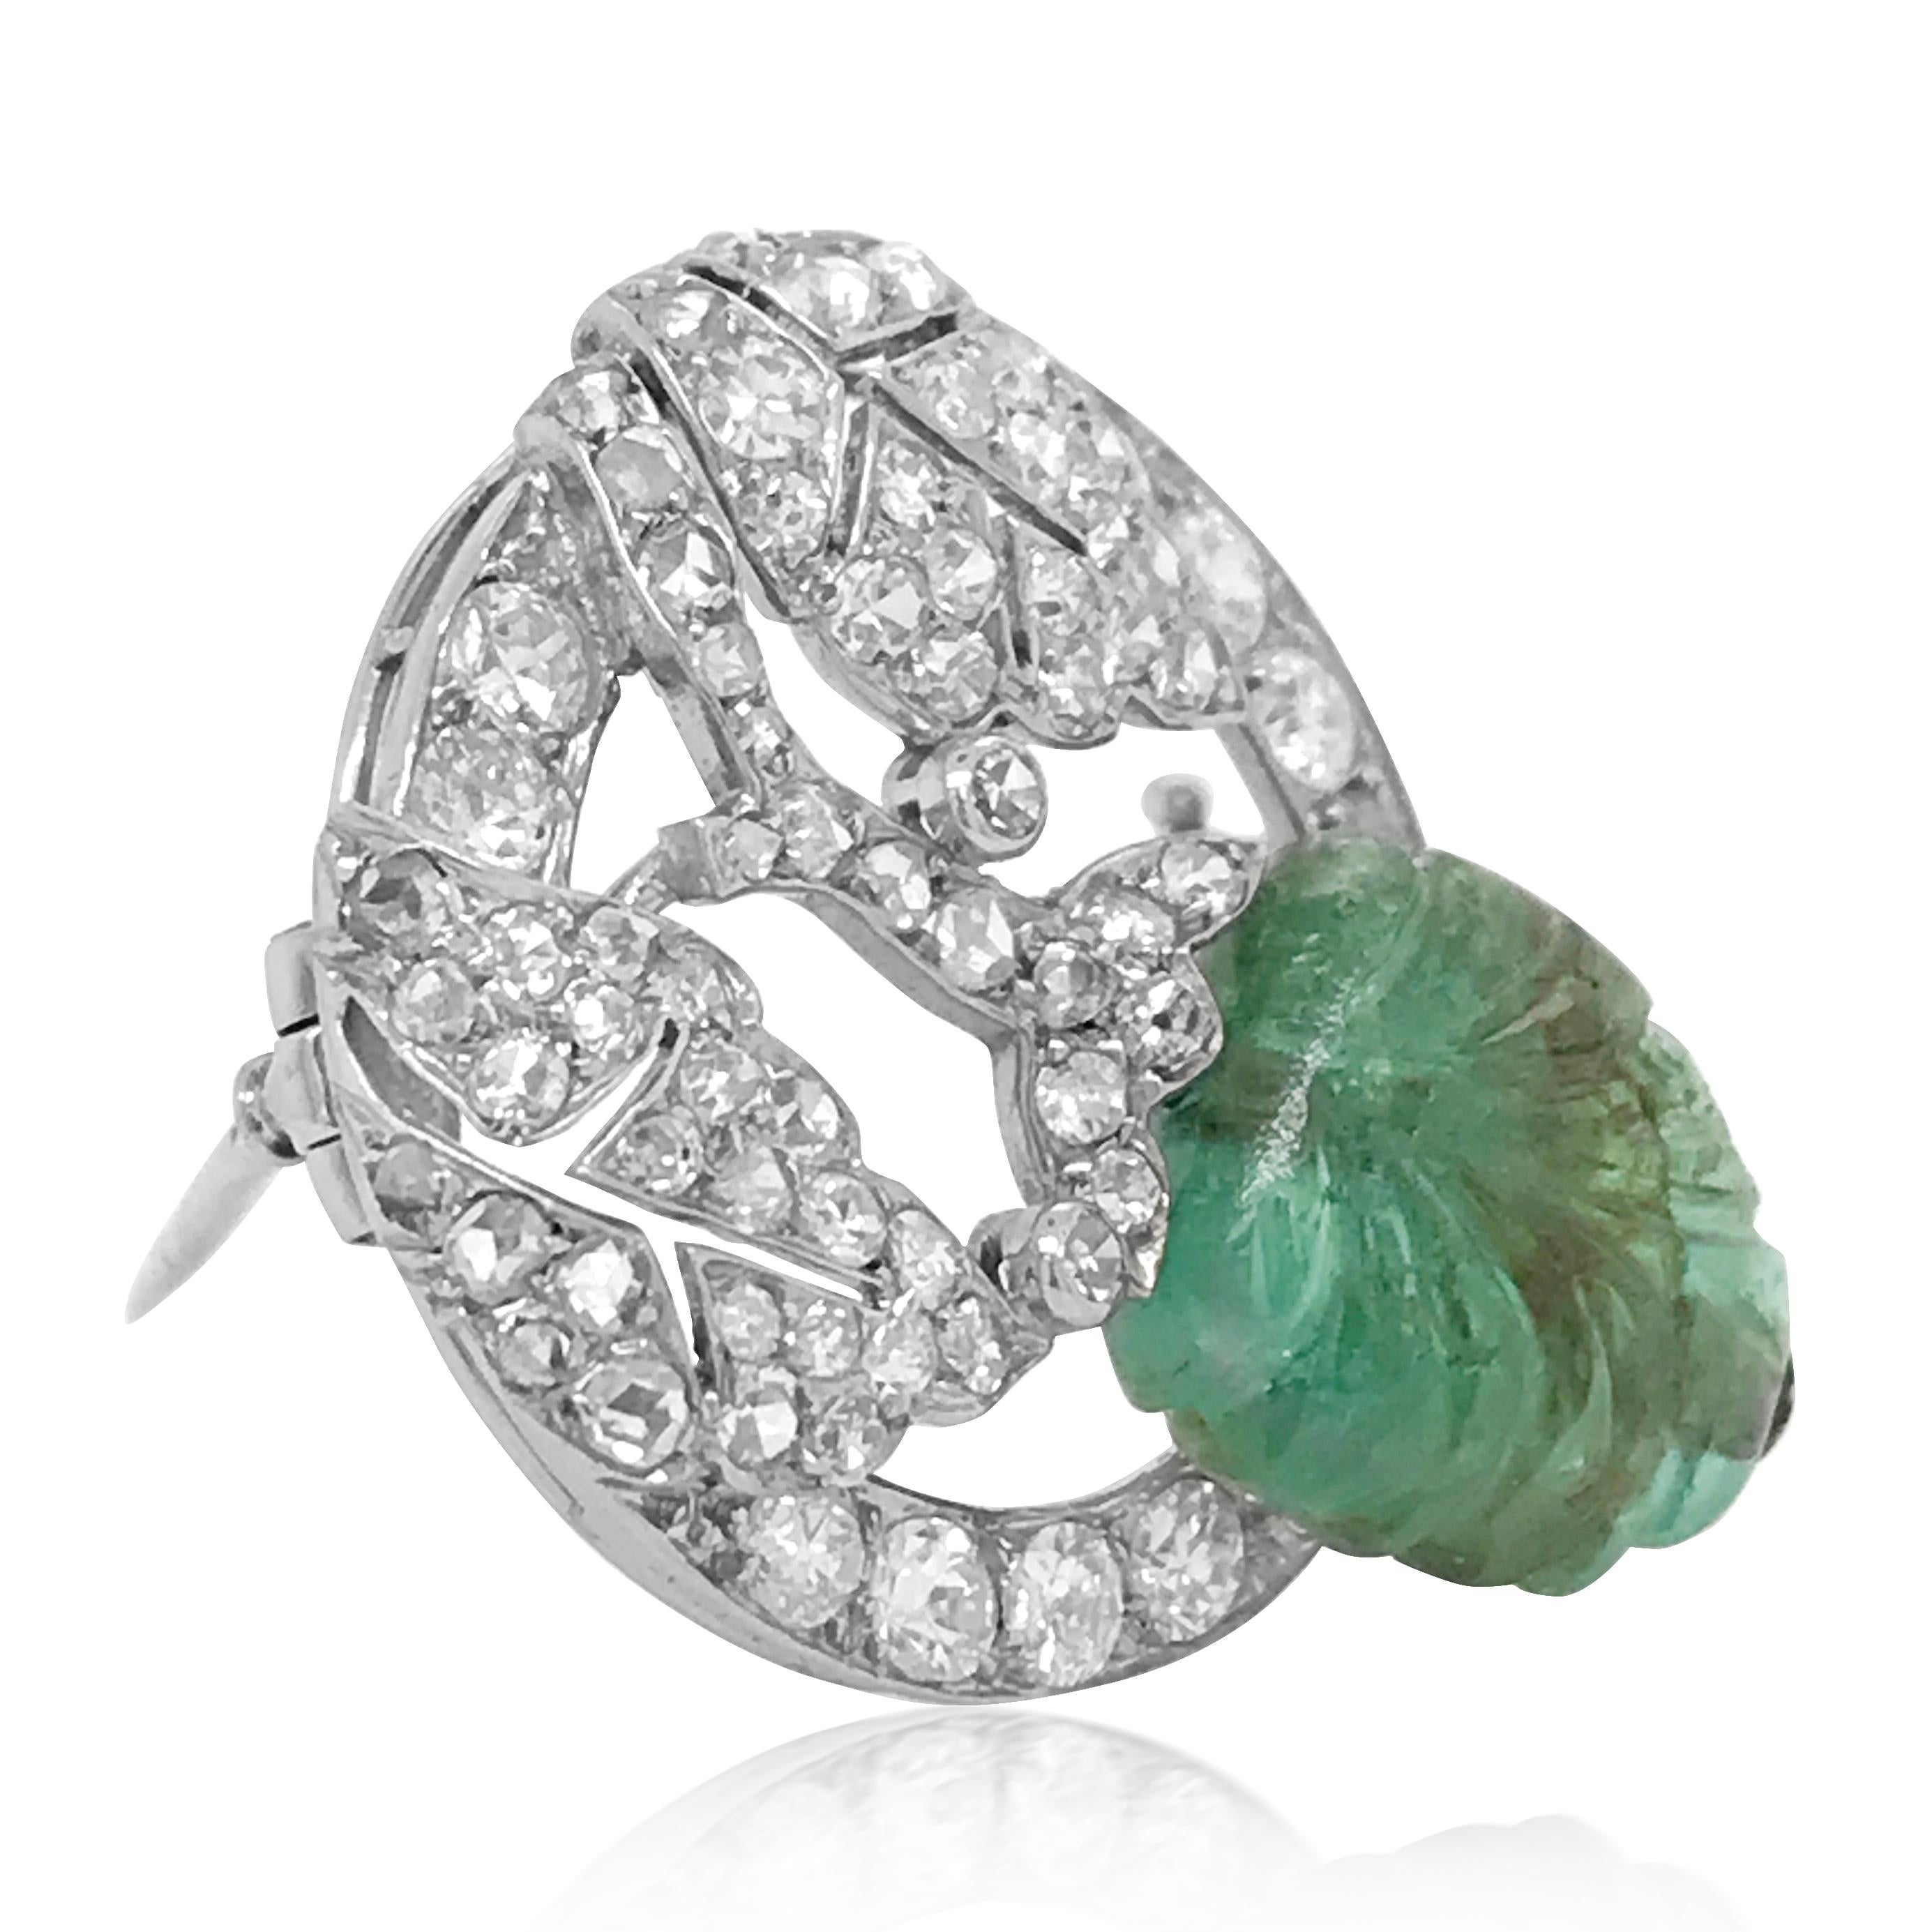 This stylized Marchak openwork leaf motif brooch is centered with one carved emerald leaf approximately 12.2 x 11.2 x 6.6 mm, set with transitional, single and rose-cut diamonds weighing cumulatively 1.0ct, several H-I-VS-SI, several chipped